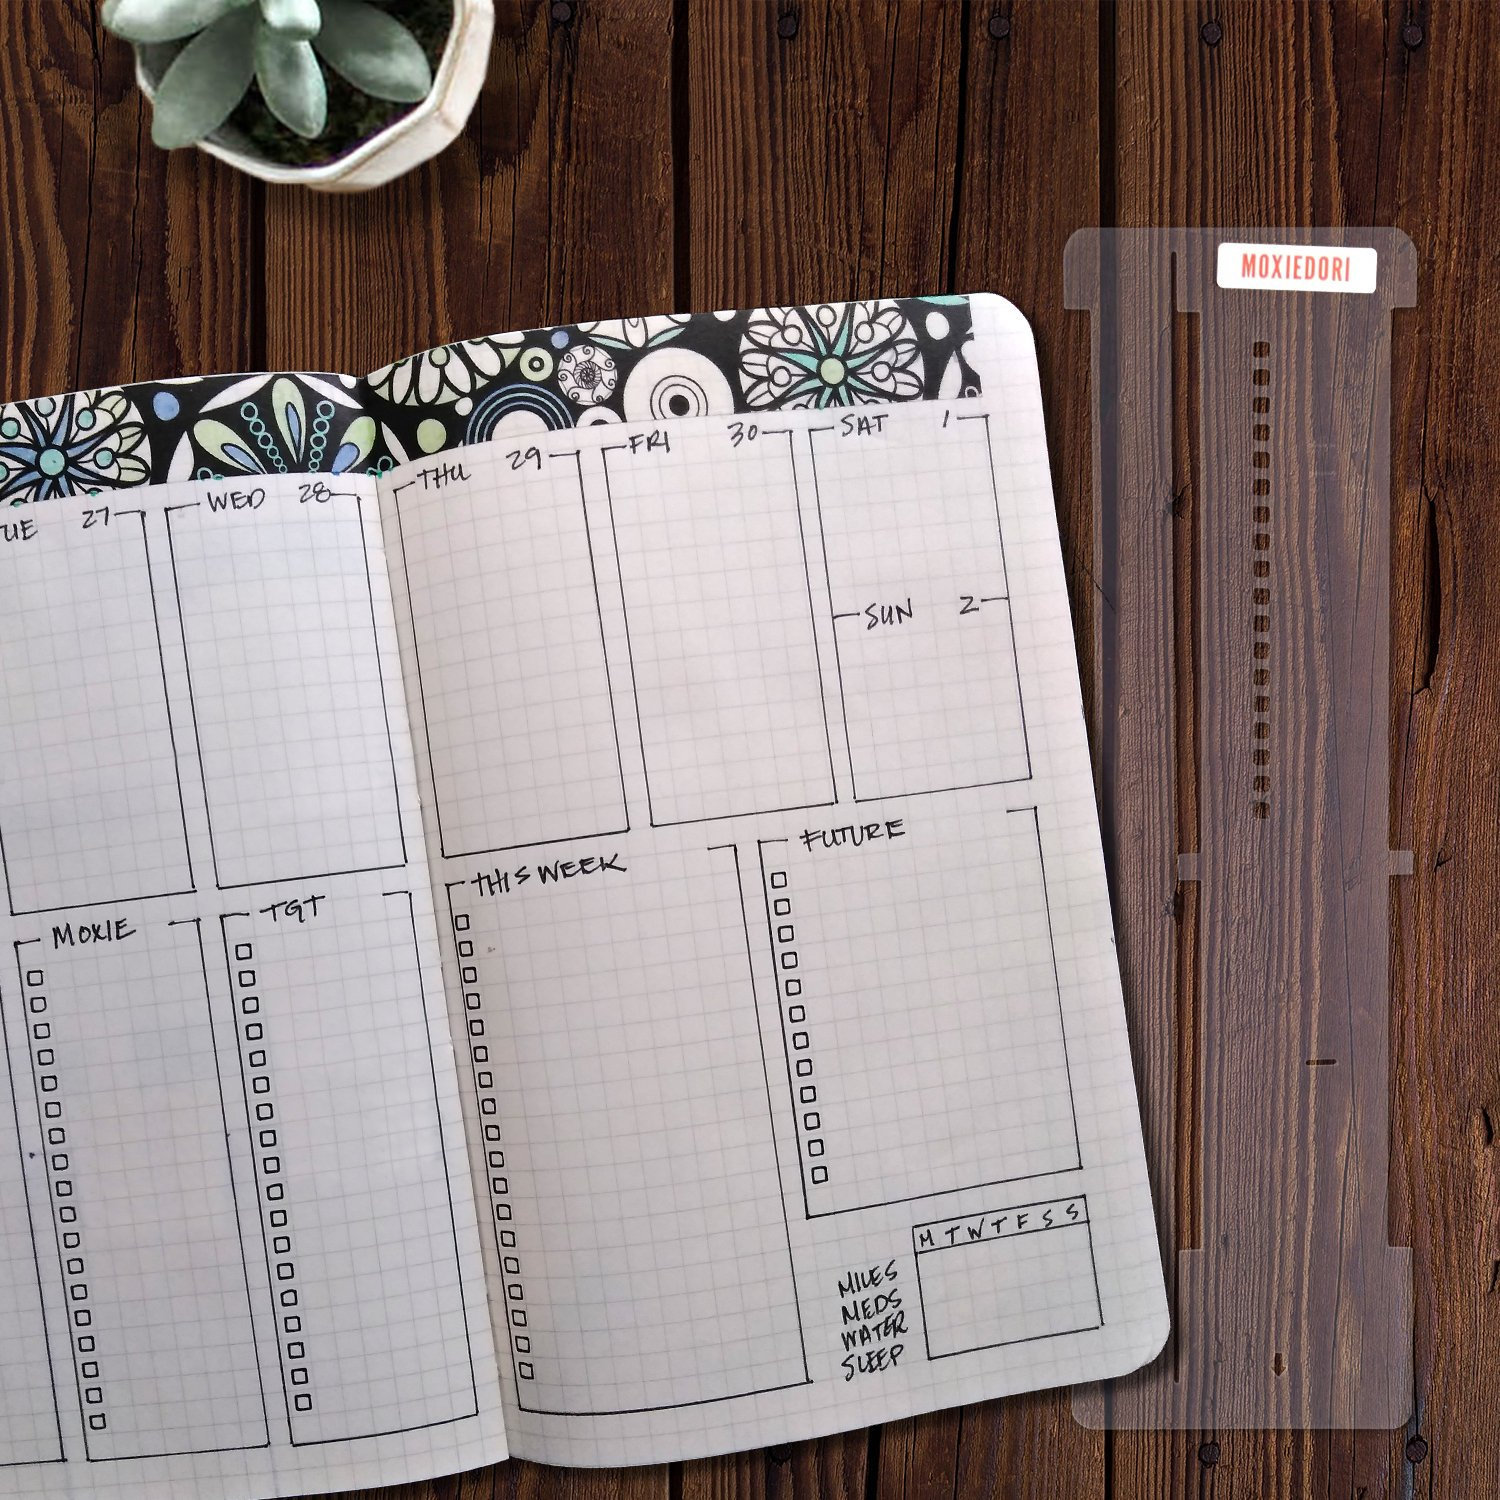 stationery, weekly spread and bullet journal - image #6847471 on